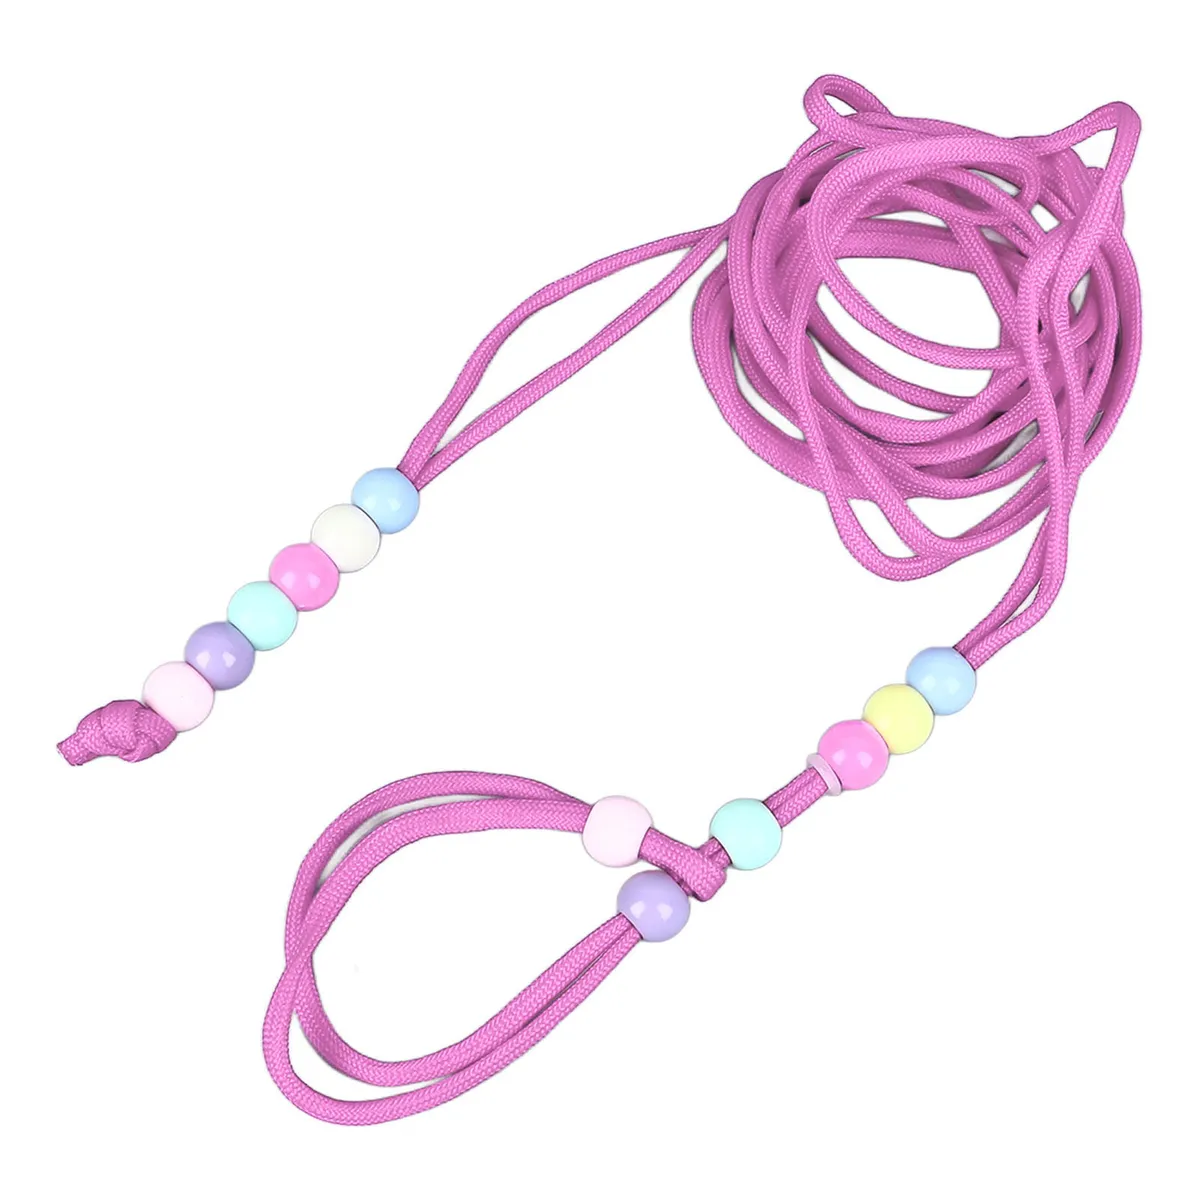 Pink Lizard Traction Rope Comfortable Durable Safety Protection